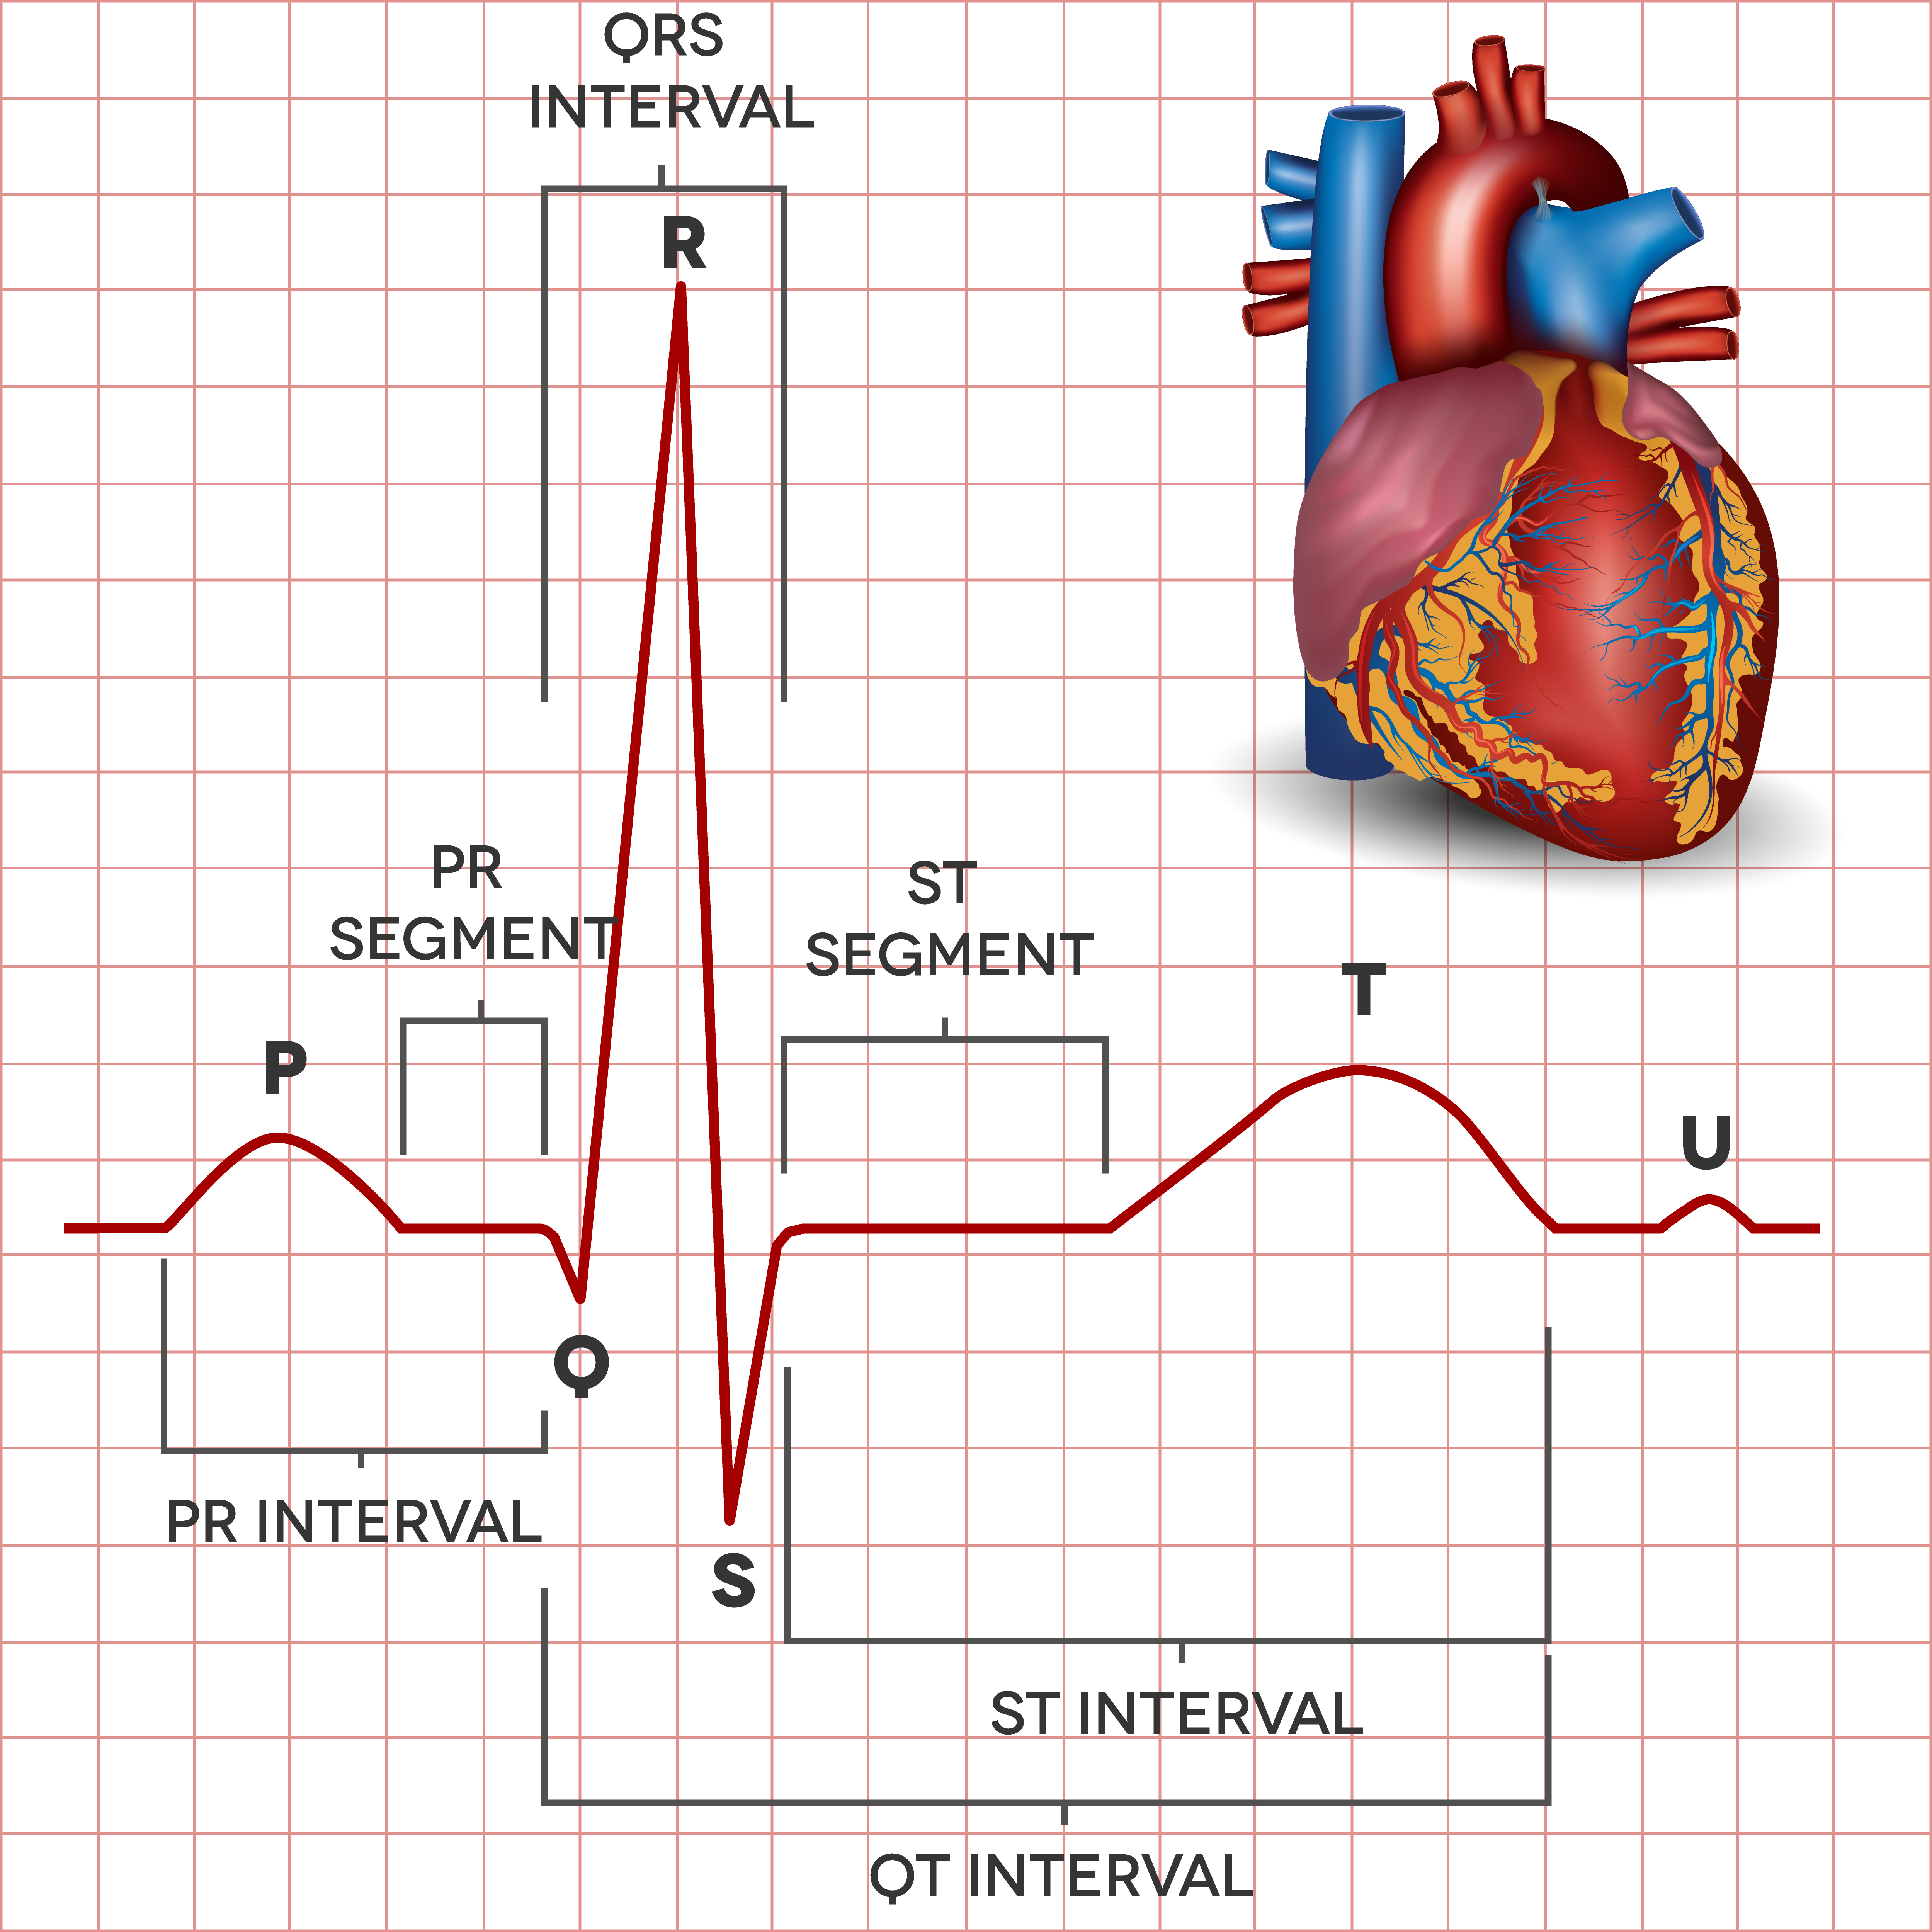 normal 12 lead ecg labeled